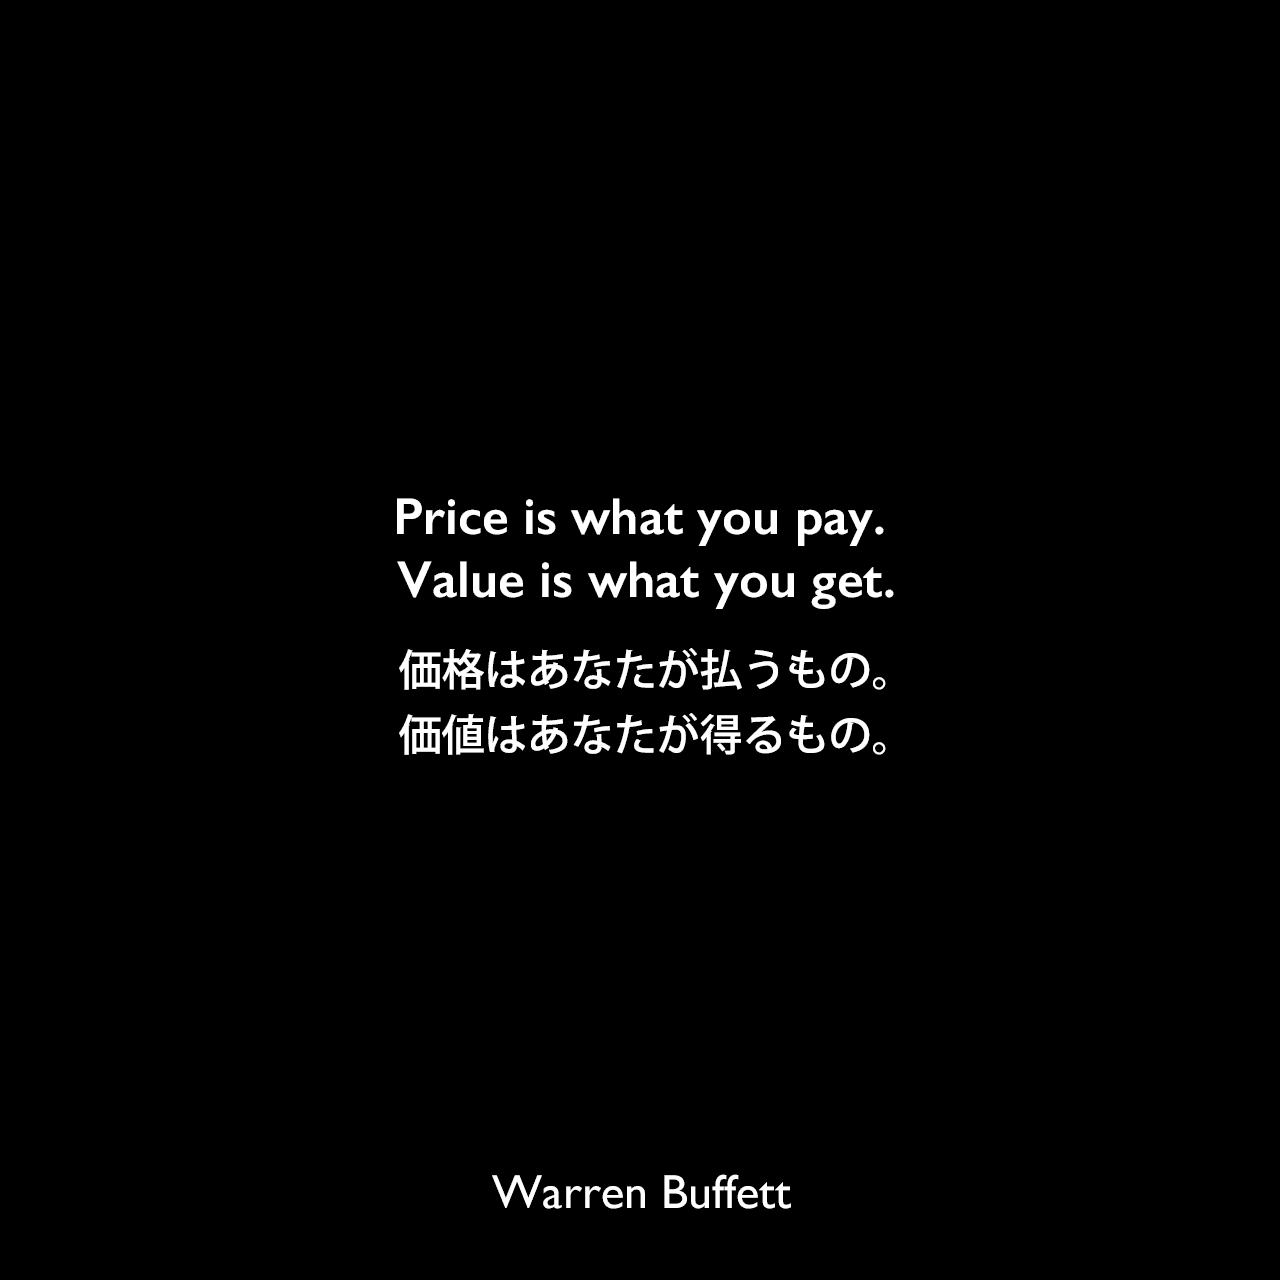 Price is what you pay. Value is what you get.価格はあなたが払うもの。価値はあなたが得るもの。Warren Buffett